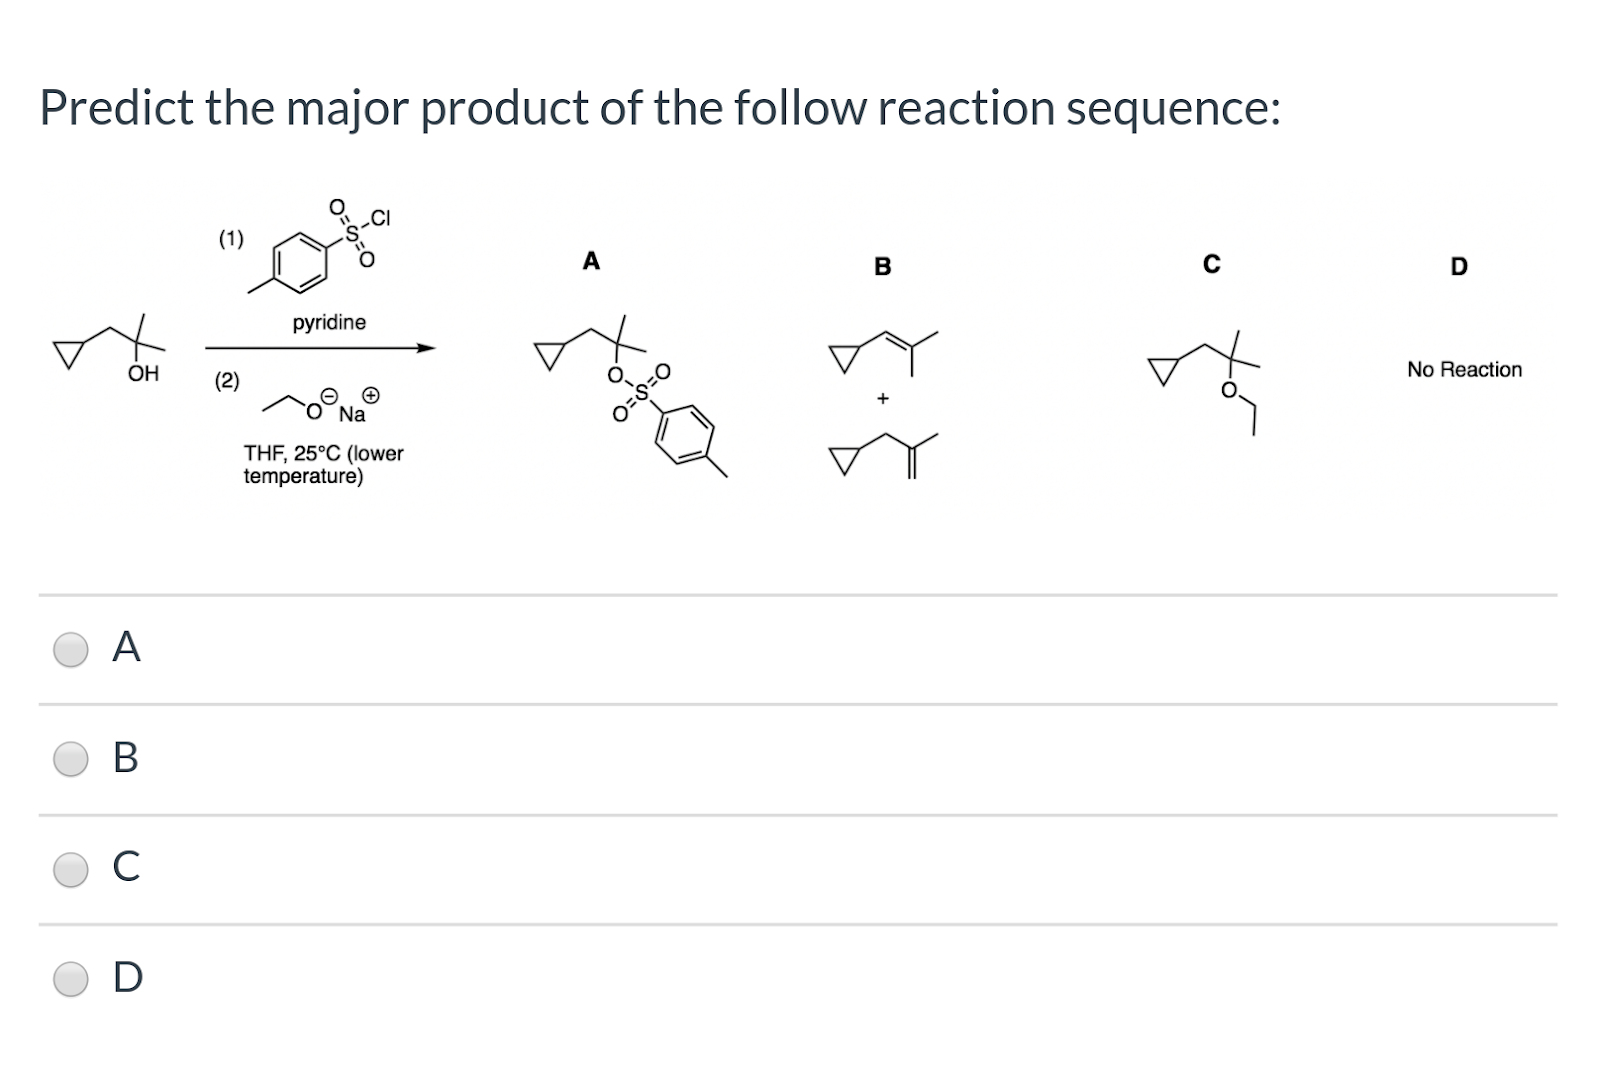 Predict the major product of the follow reaction sequence: 0 = -G pyridine to No Reaction (2) Ol=0 + do Na THF, 25°C (lower t